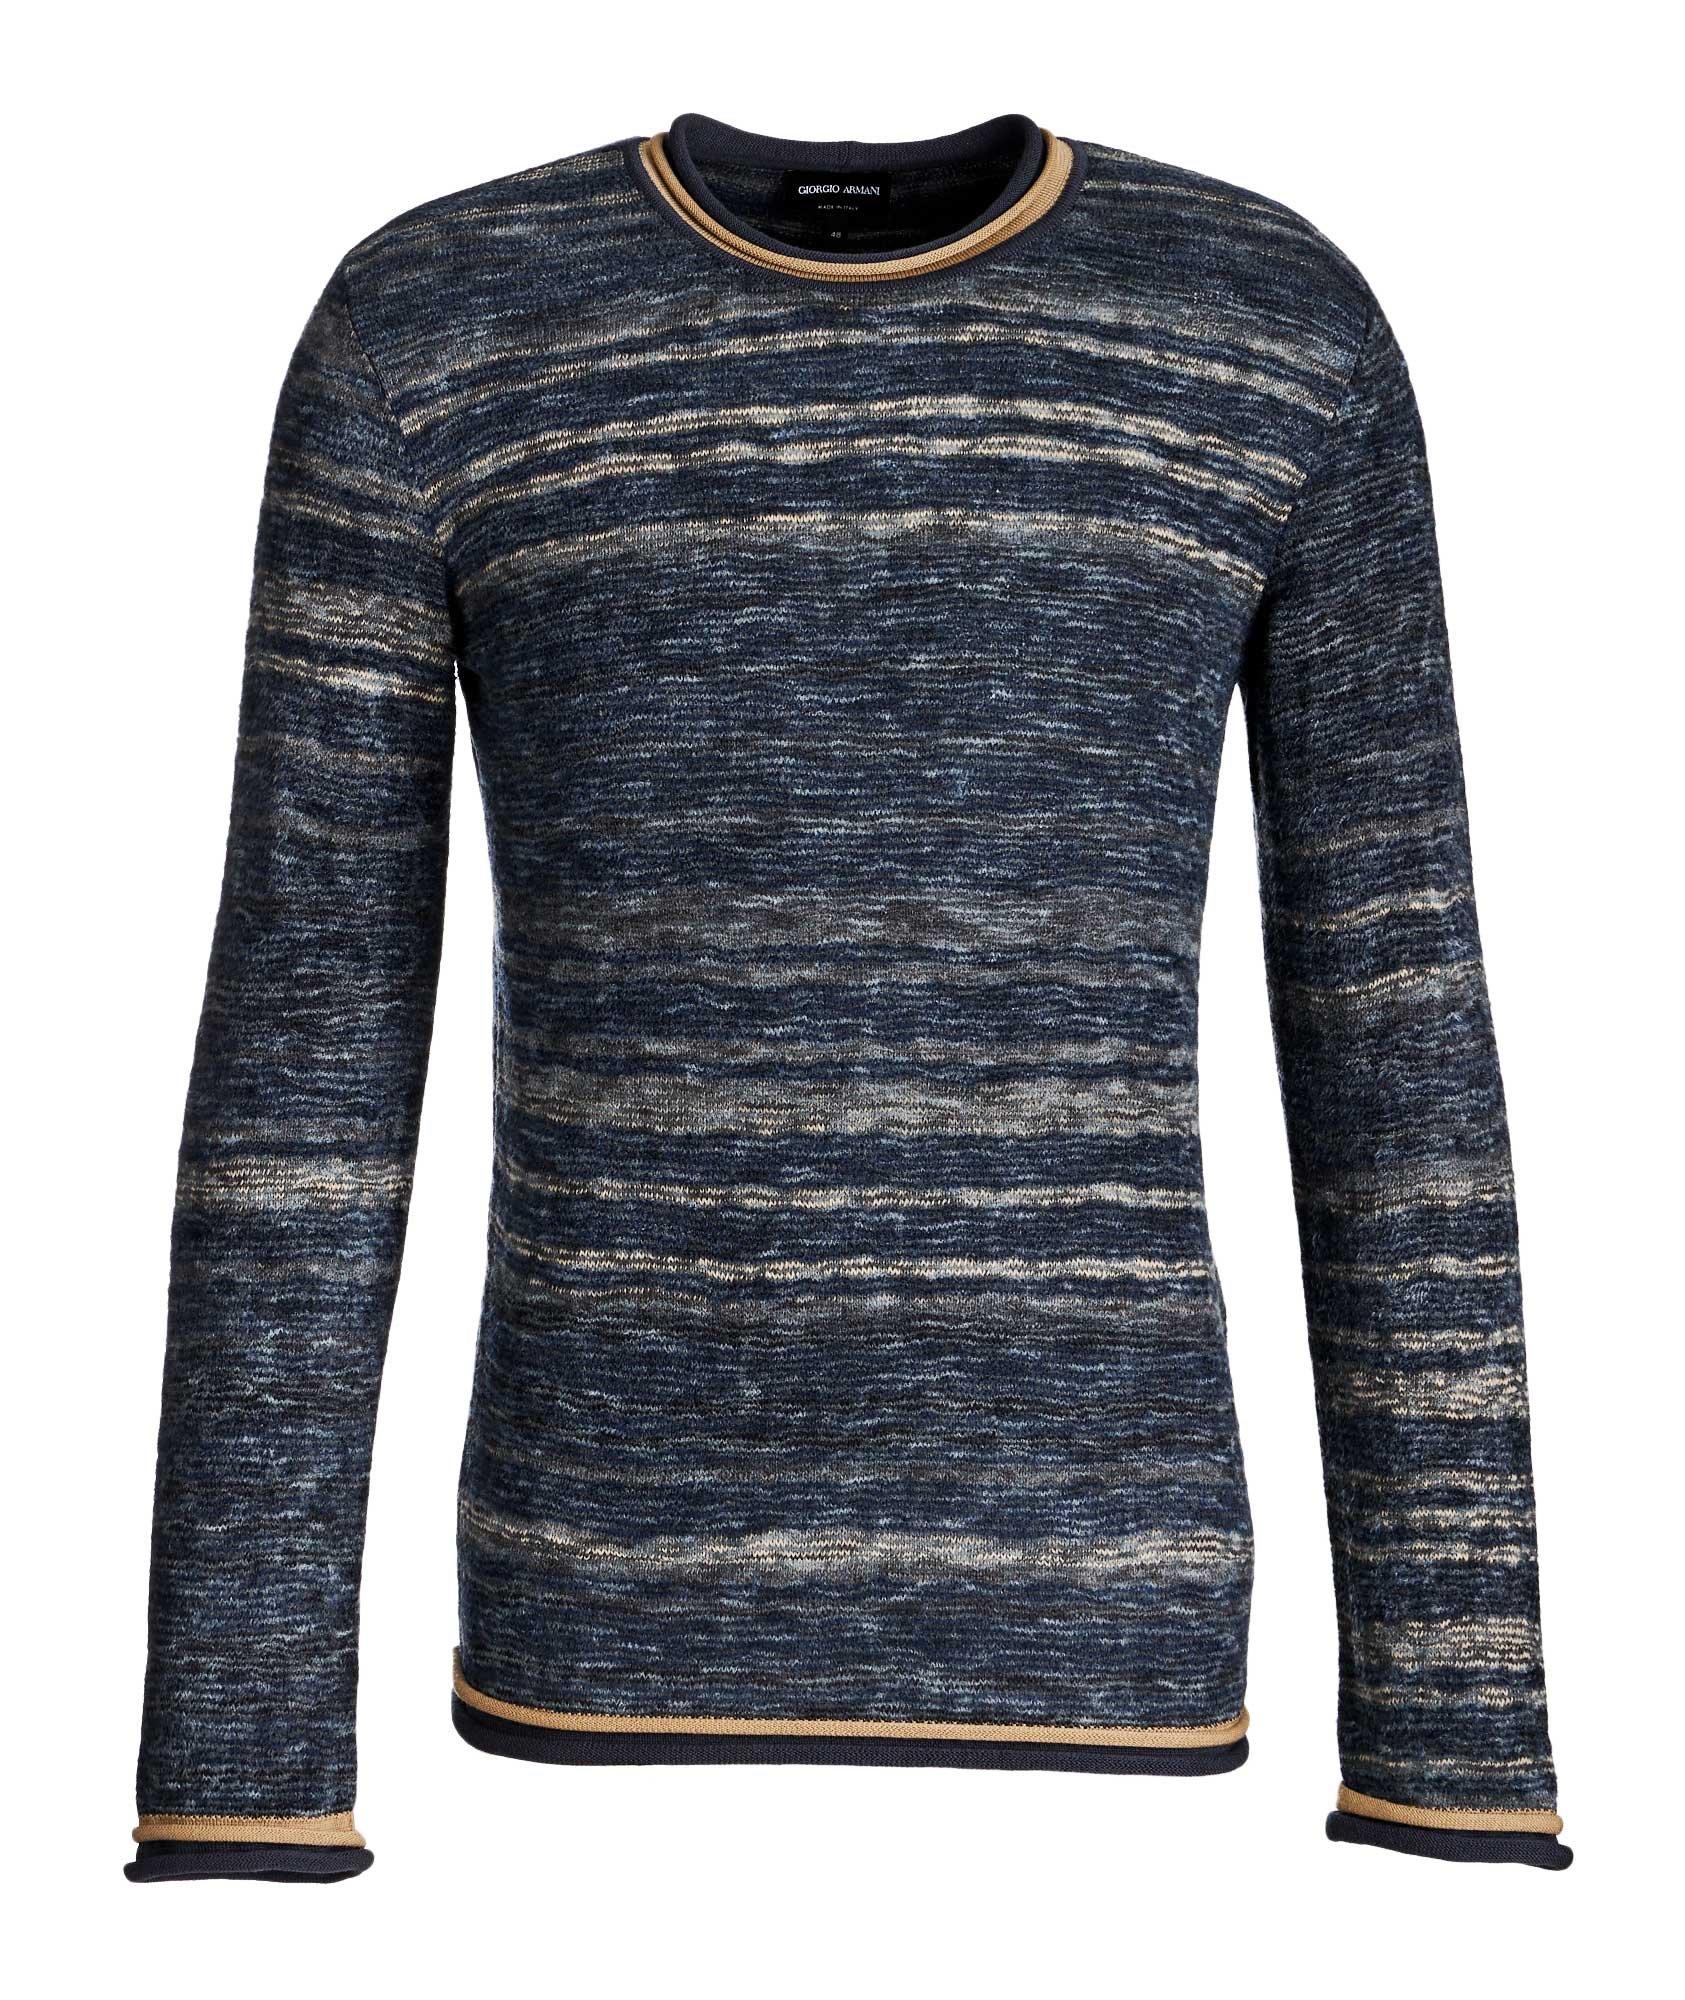 Textured Wool-Blend Sweater image 0